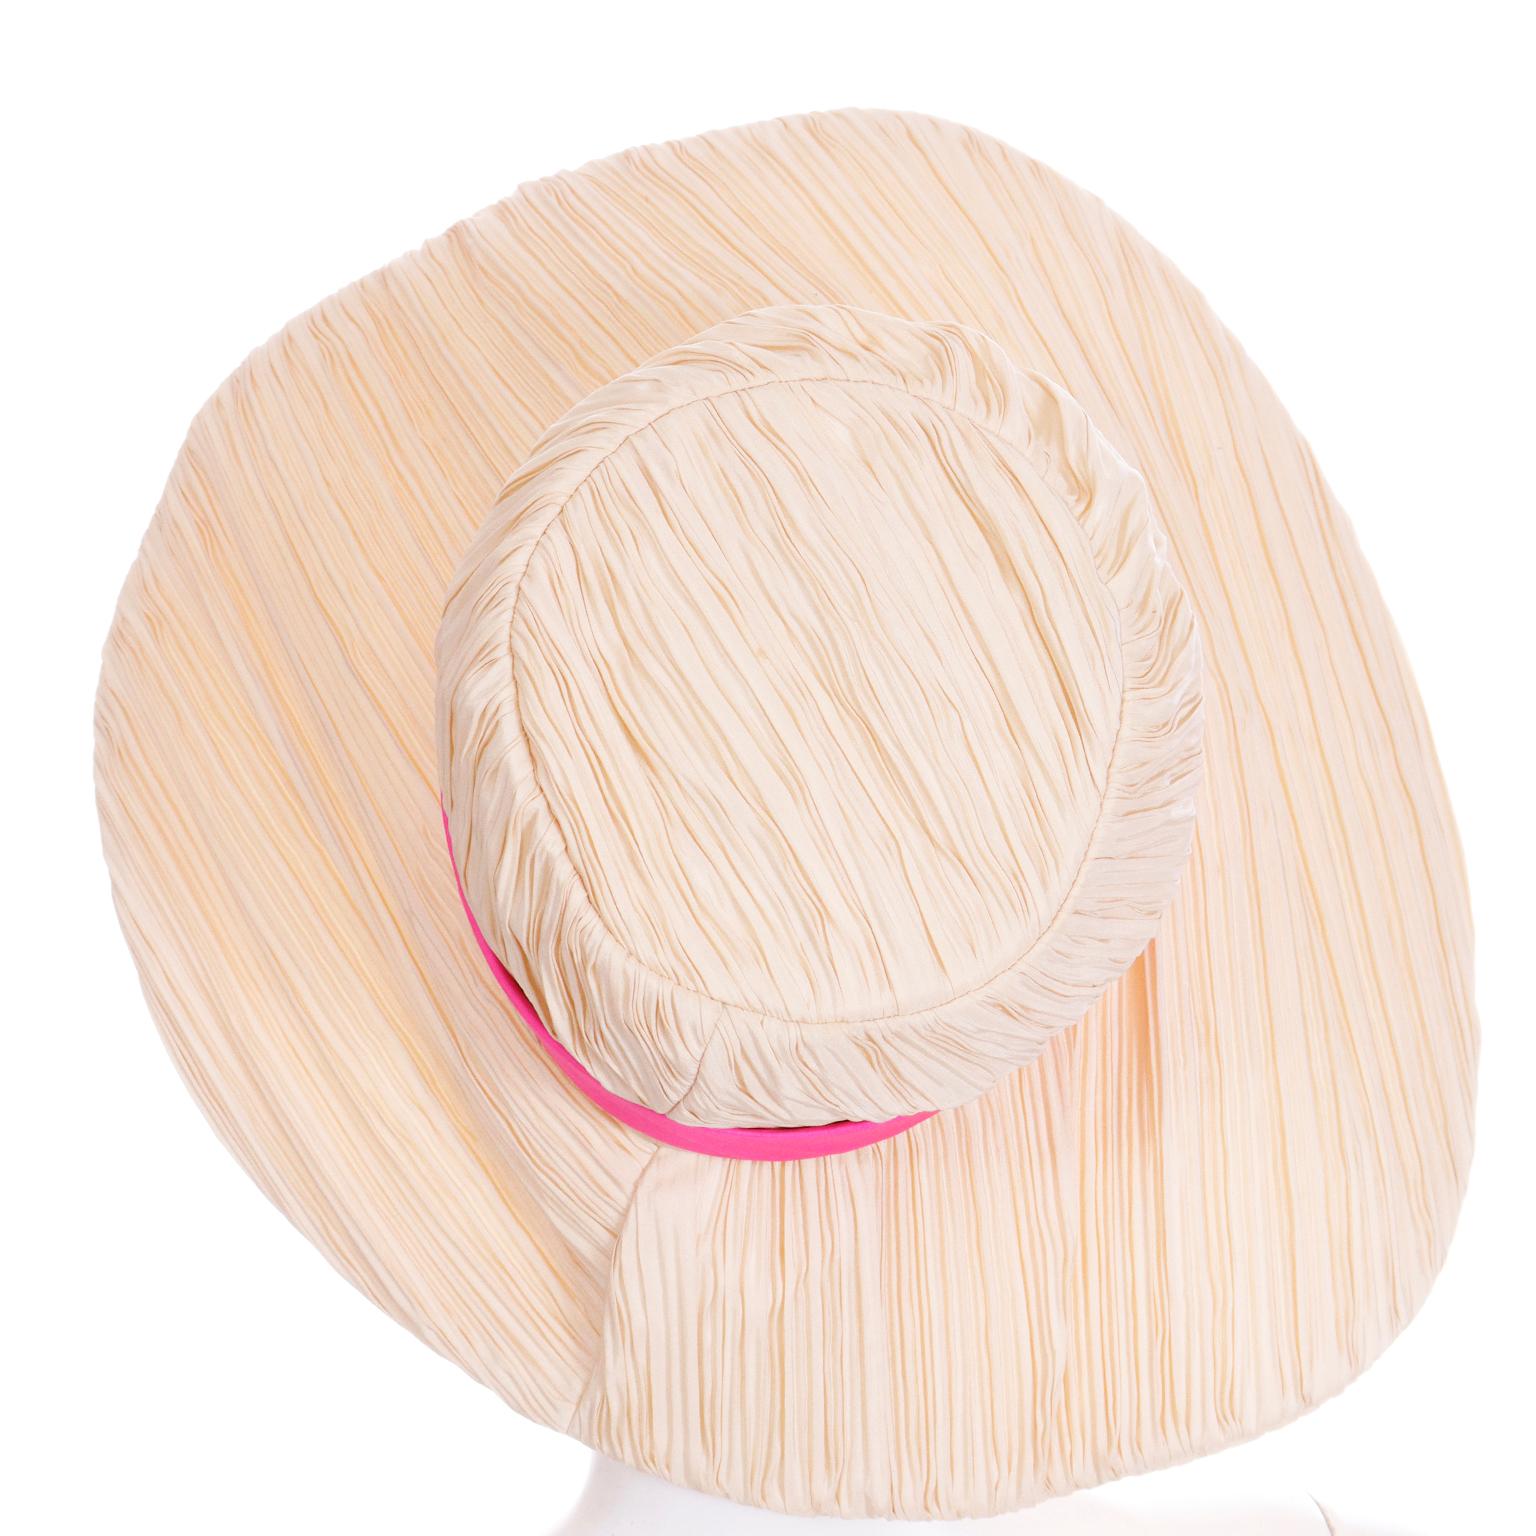 Mr John Vintage Pleated Cream Floppy Hat With Hot Pink Silk Band Ribbon For Sale 1